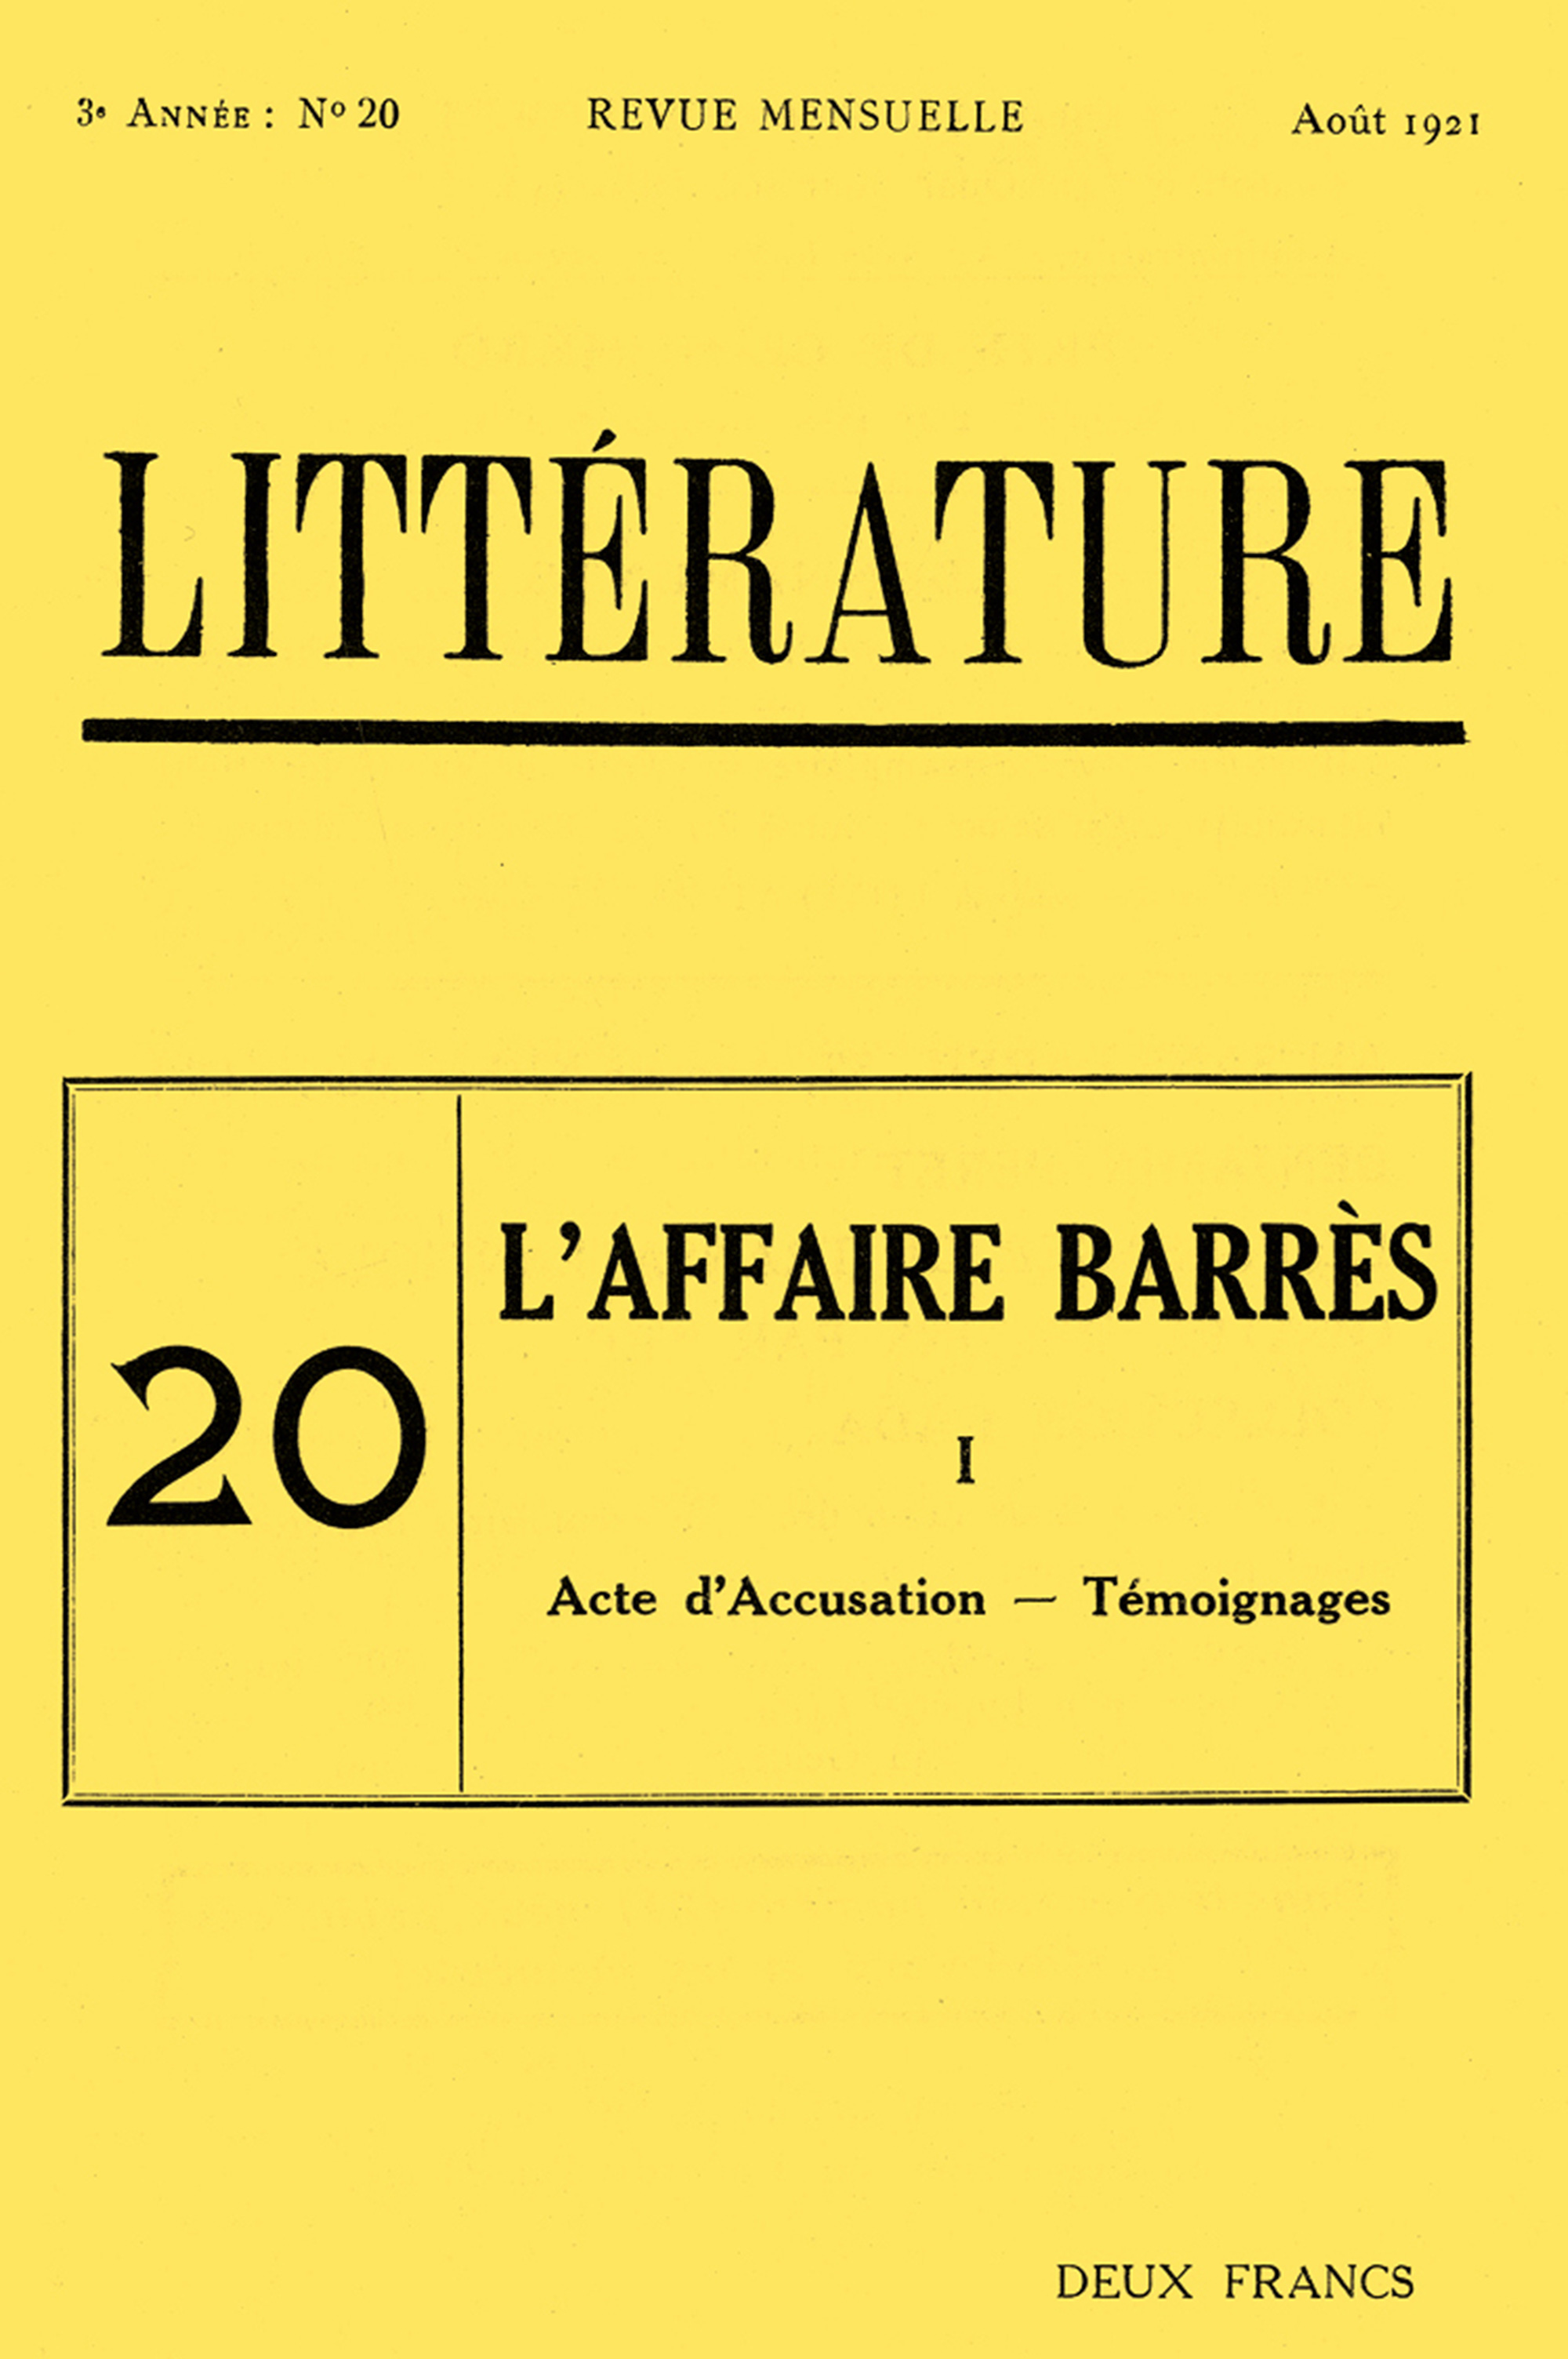 The cover of the August nineteen twenty-one issue of “Littérature.” There were no further issues.